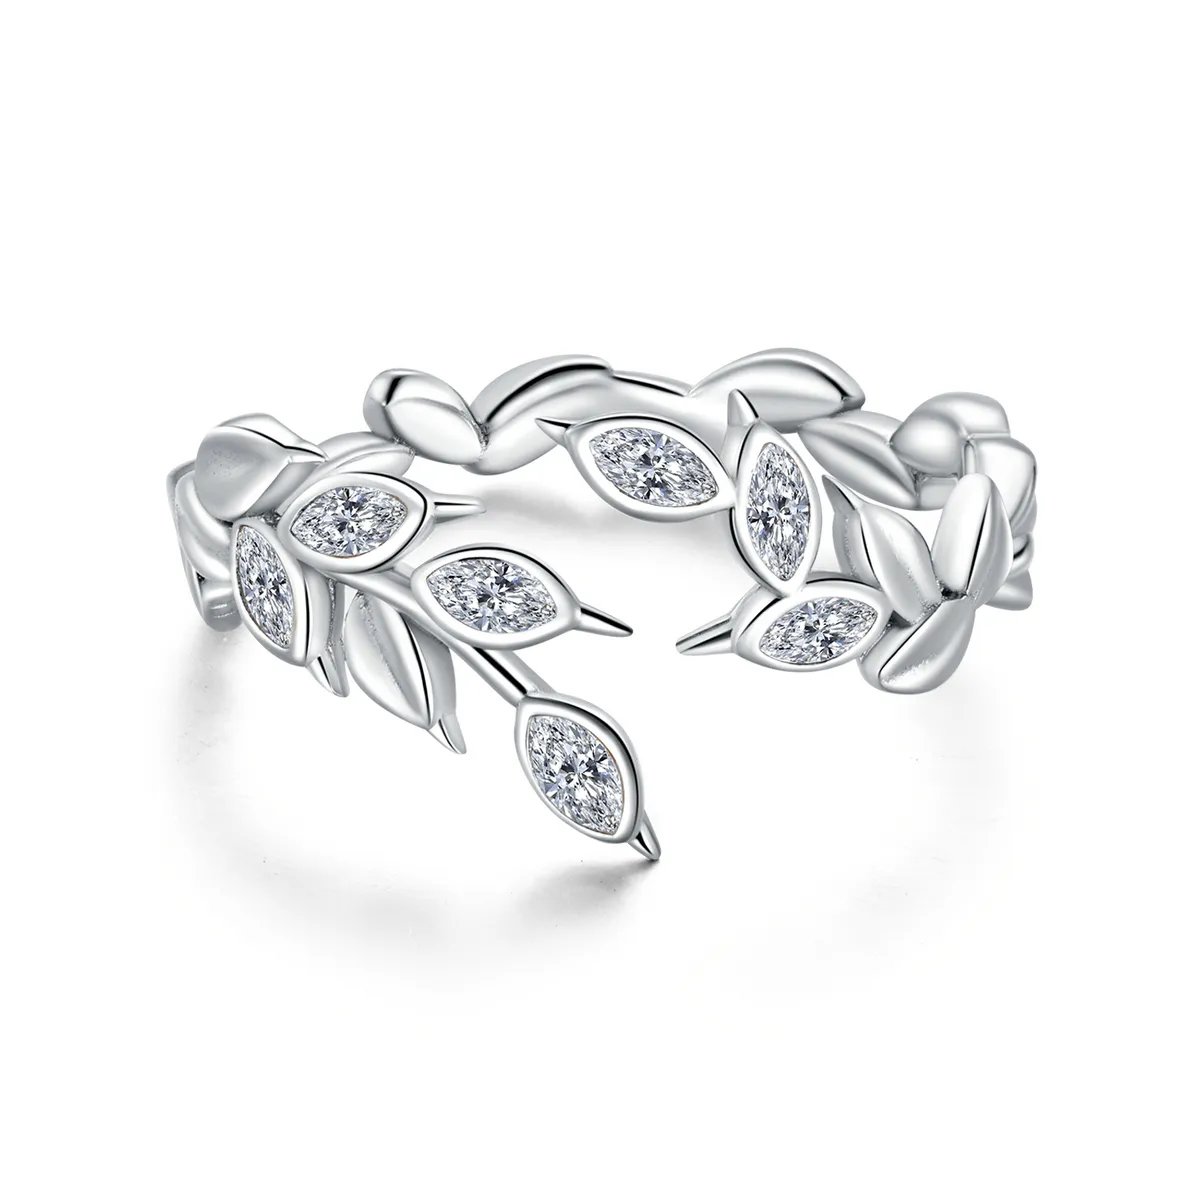 Pandora Style Silver Shining Wheat Spike Open Ring - BSR135